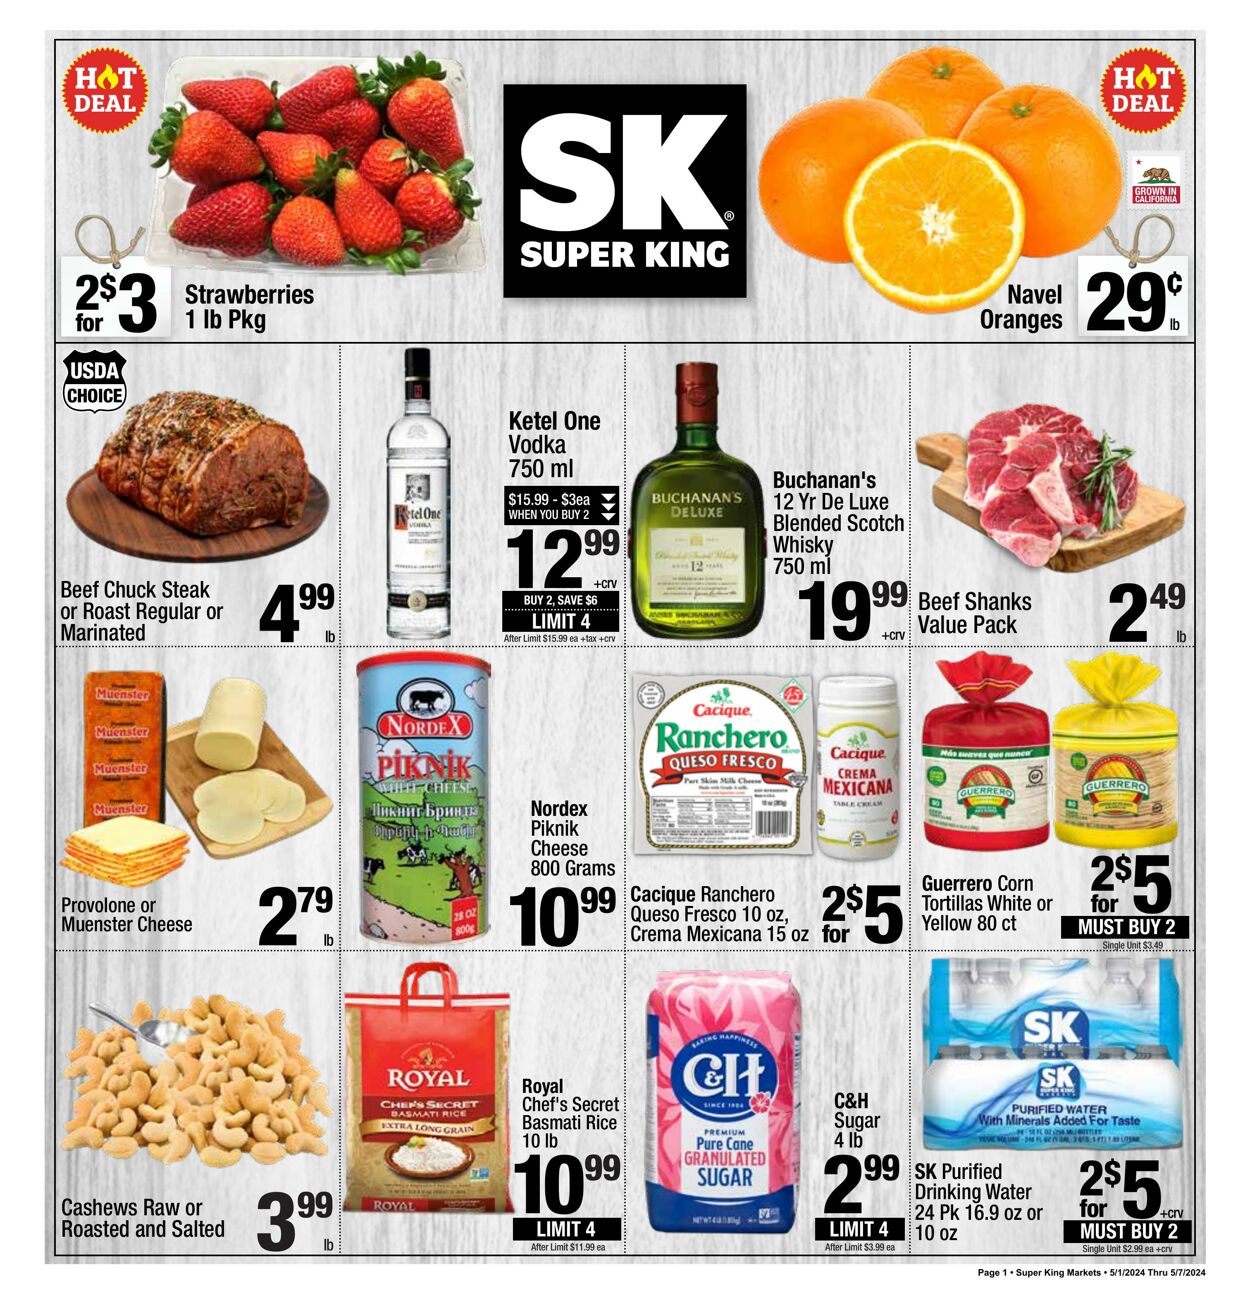 Super King Markets Promotional weekly ads